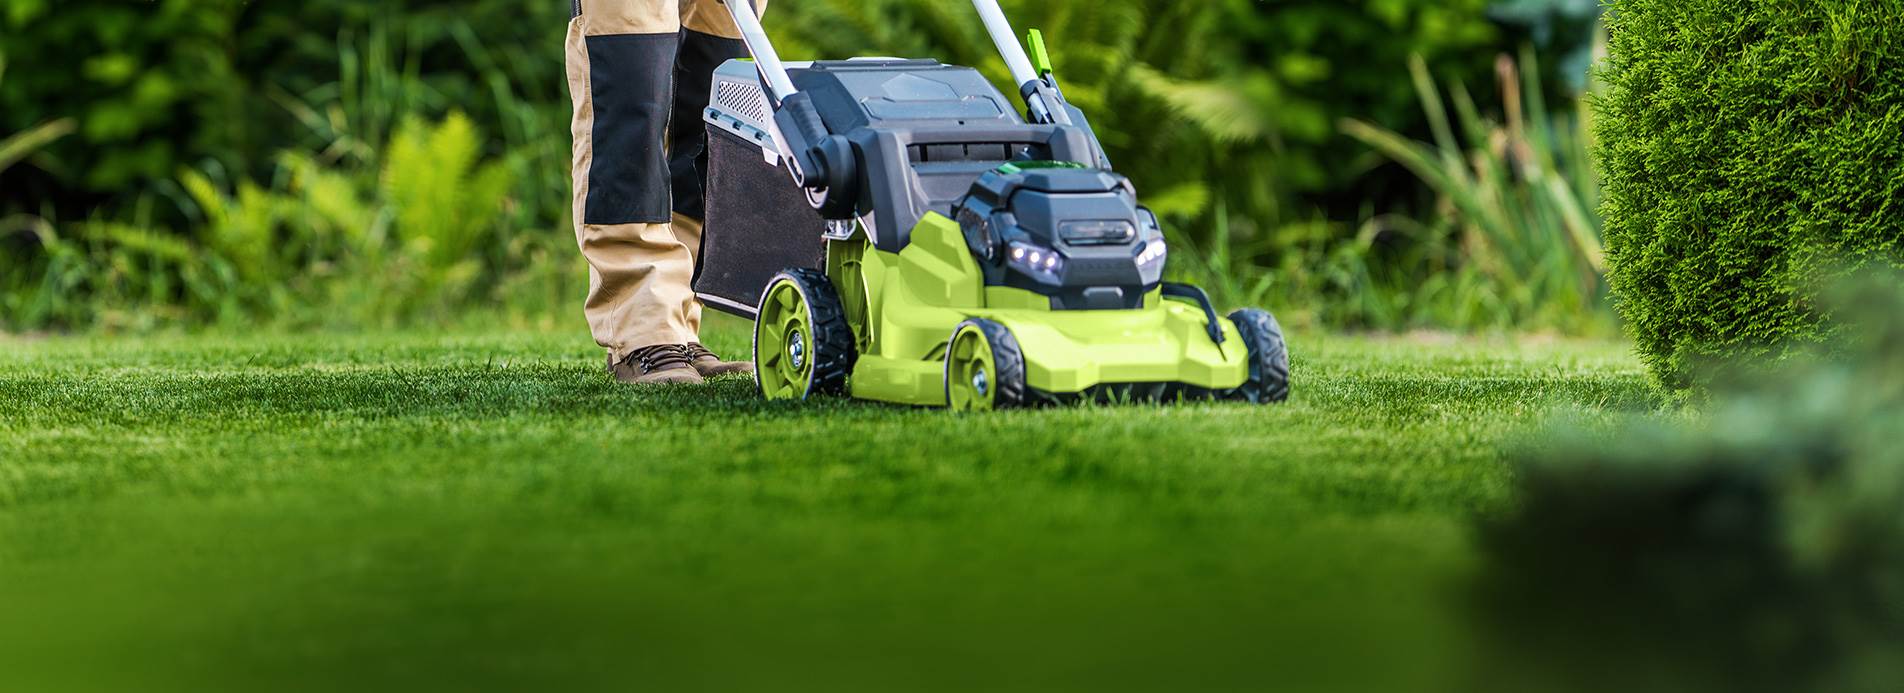 bnr-services-mowing-services